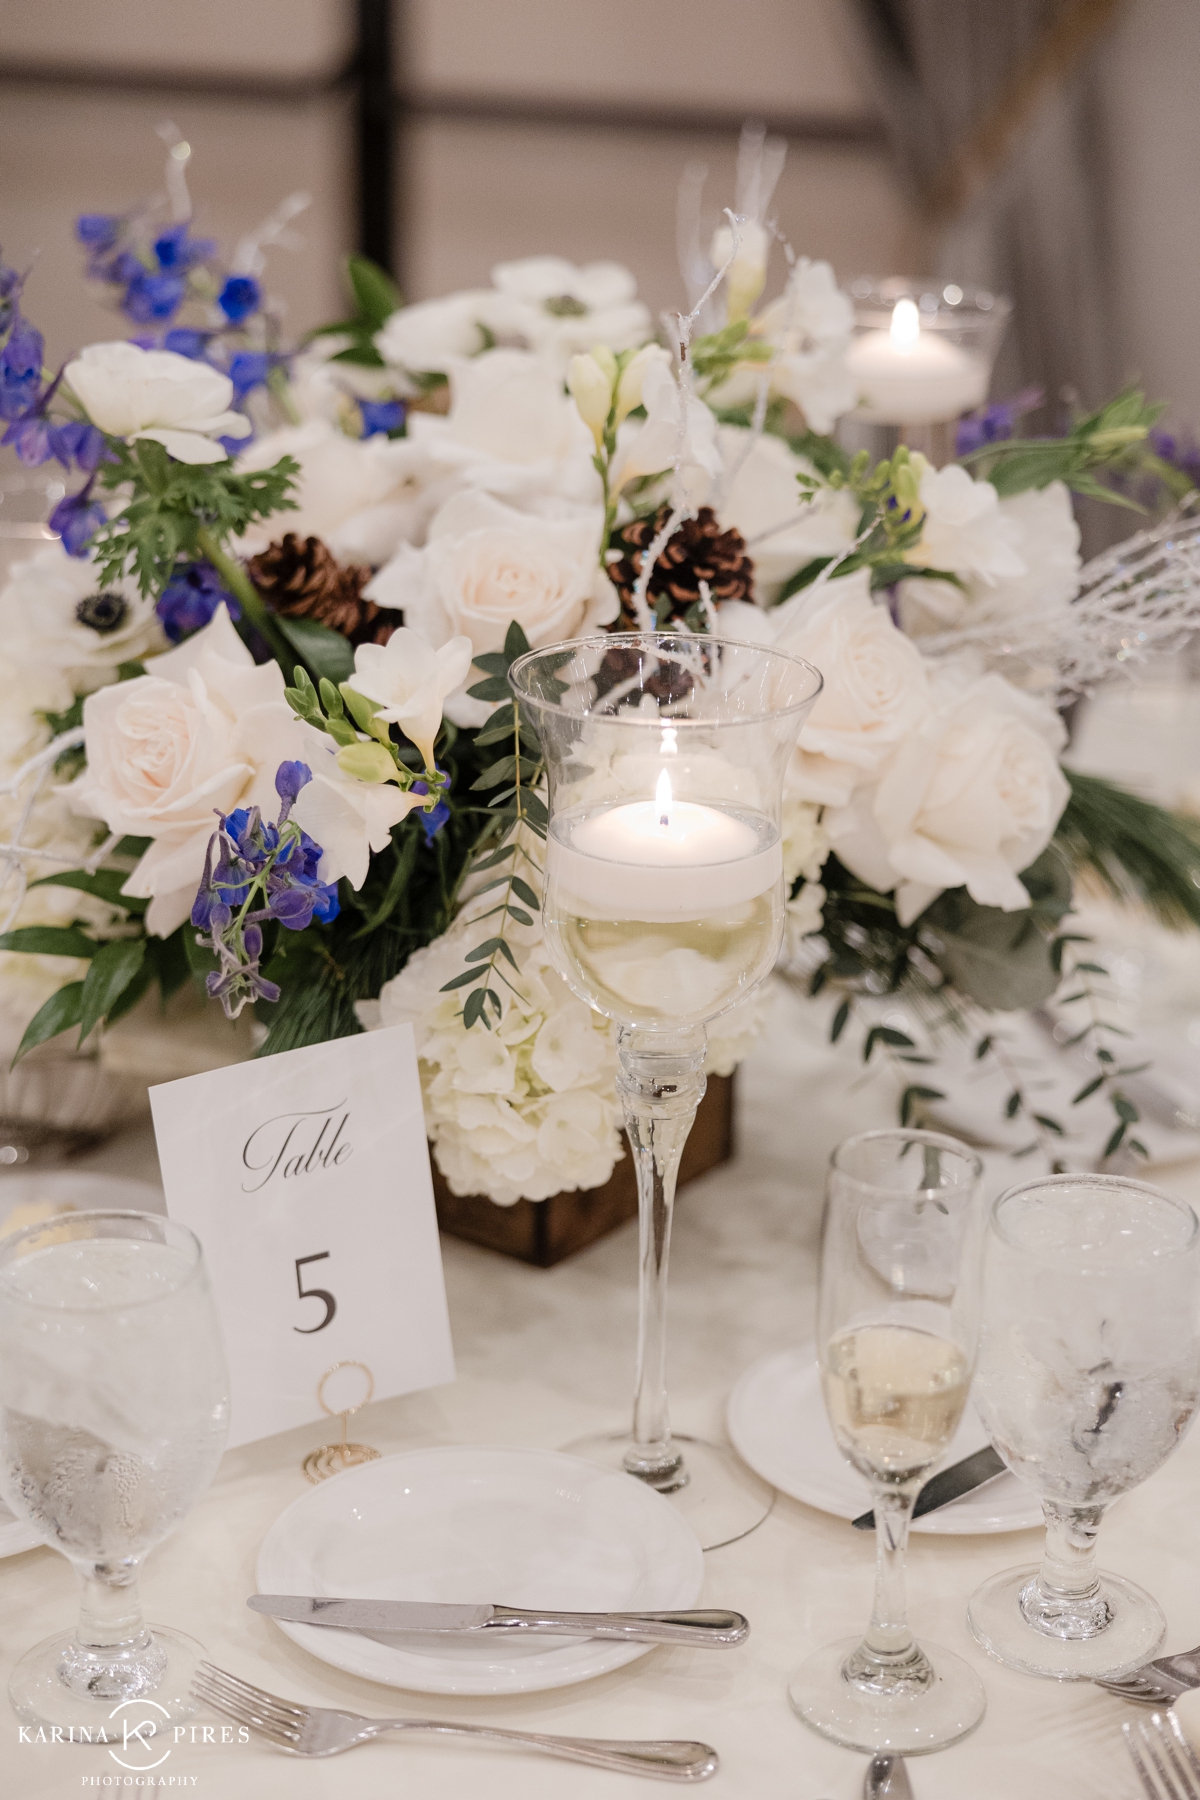 Winter wedding centerpiece filled with white and dark blue flowers and pinecones